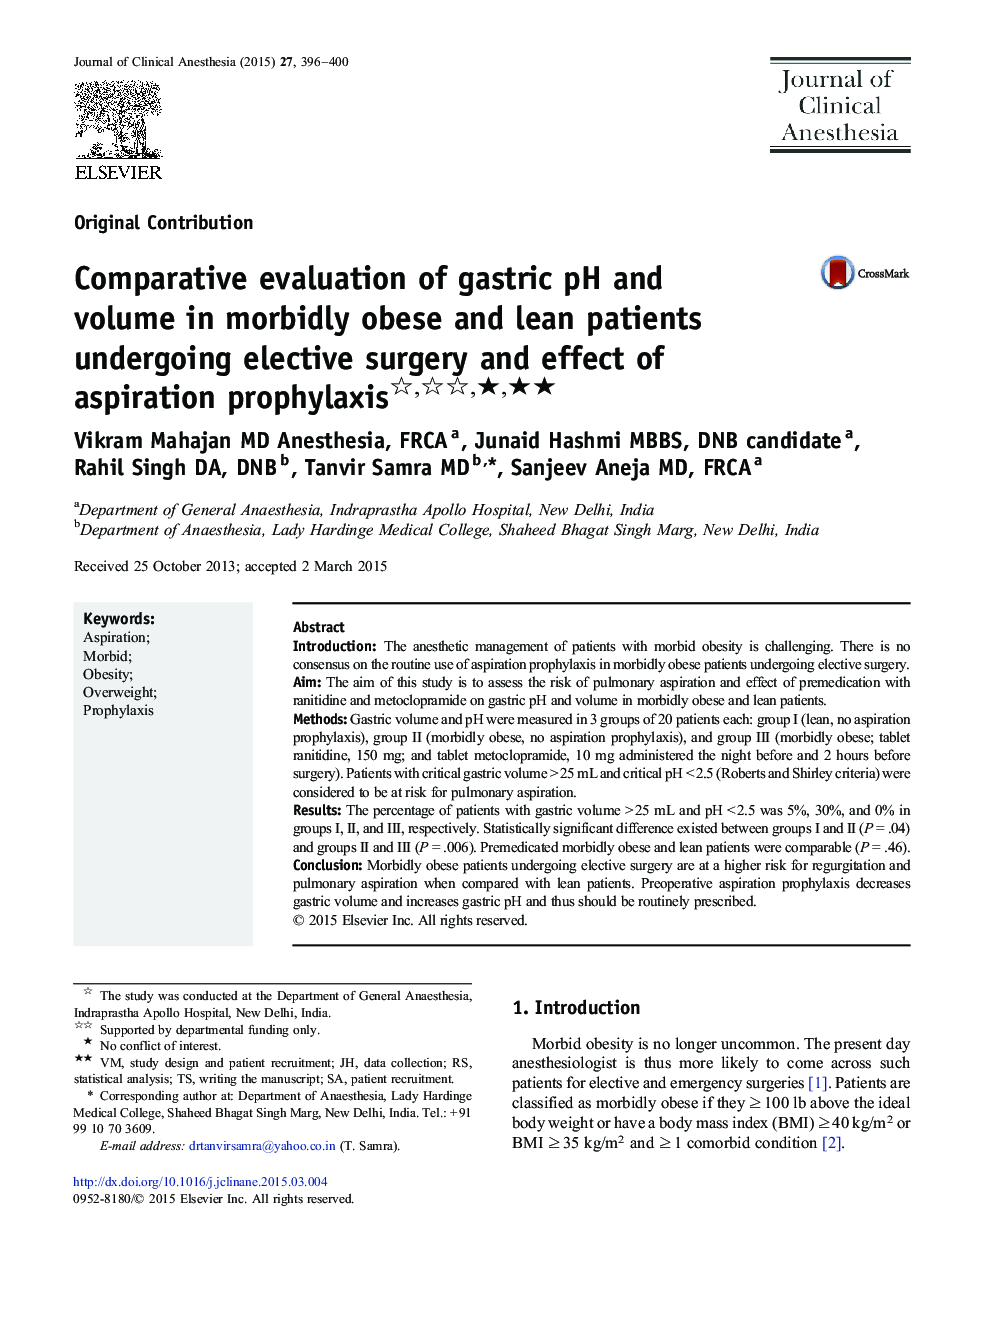 Comparative evaluation of gastric pH and volume in morbidly obese and lean patients undergoing elective surgery and effect of aspiration prophylaxis ★★★